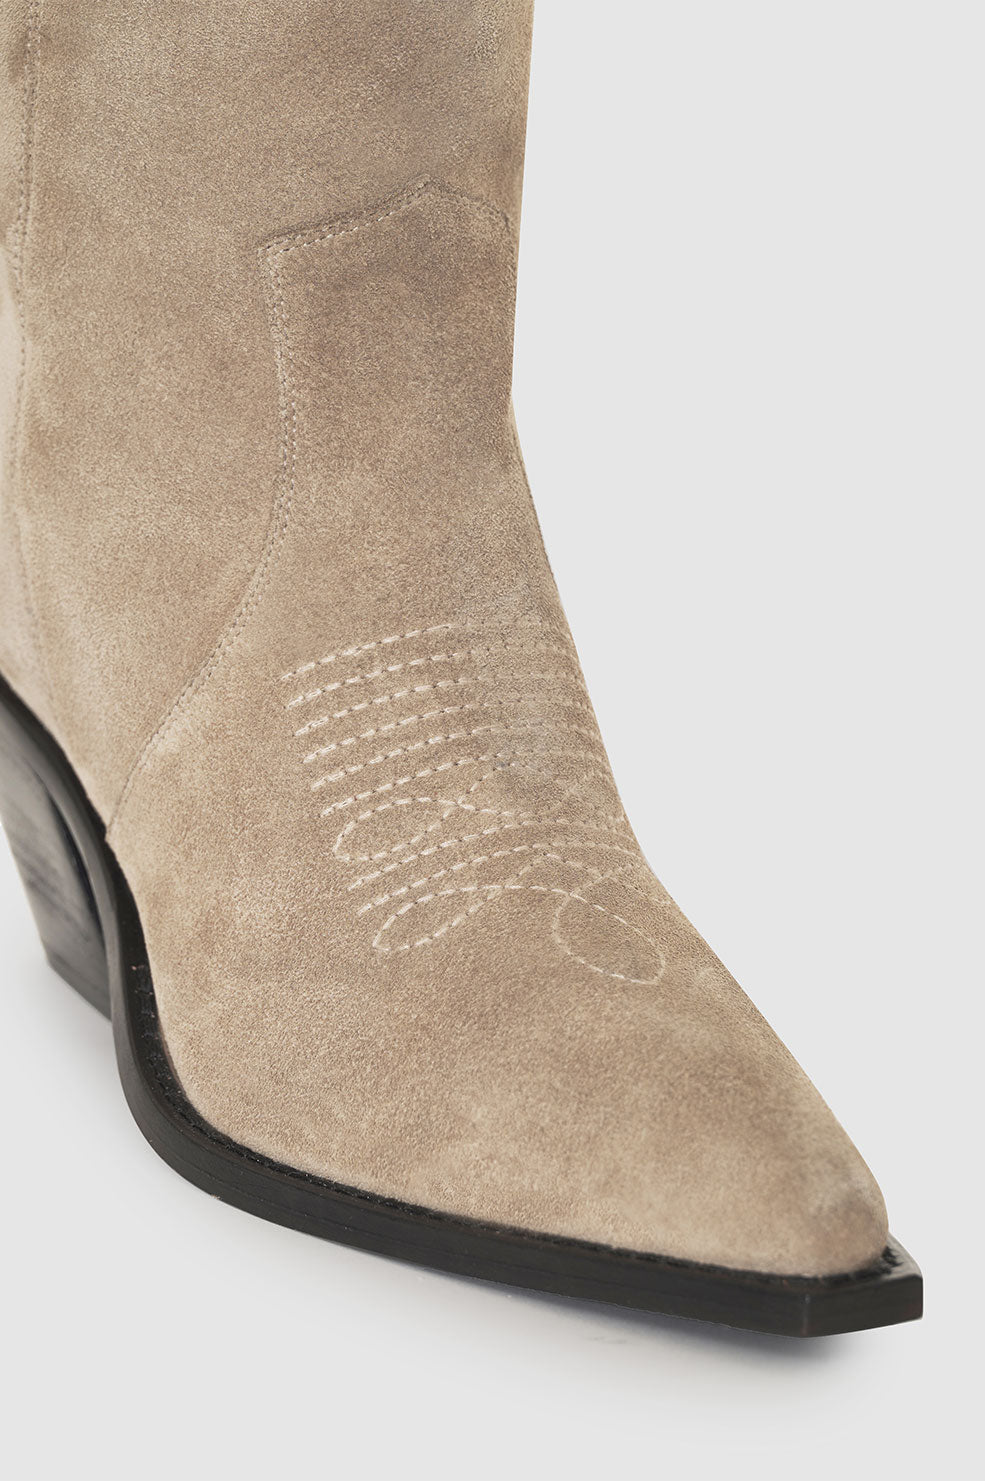 Anine Bing | Tall Tania Boots - Ash Grey Suede